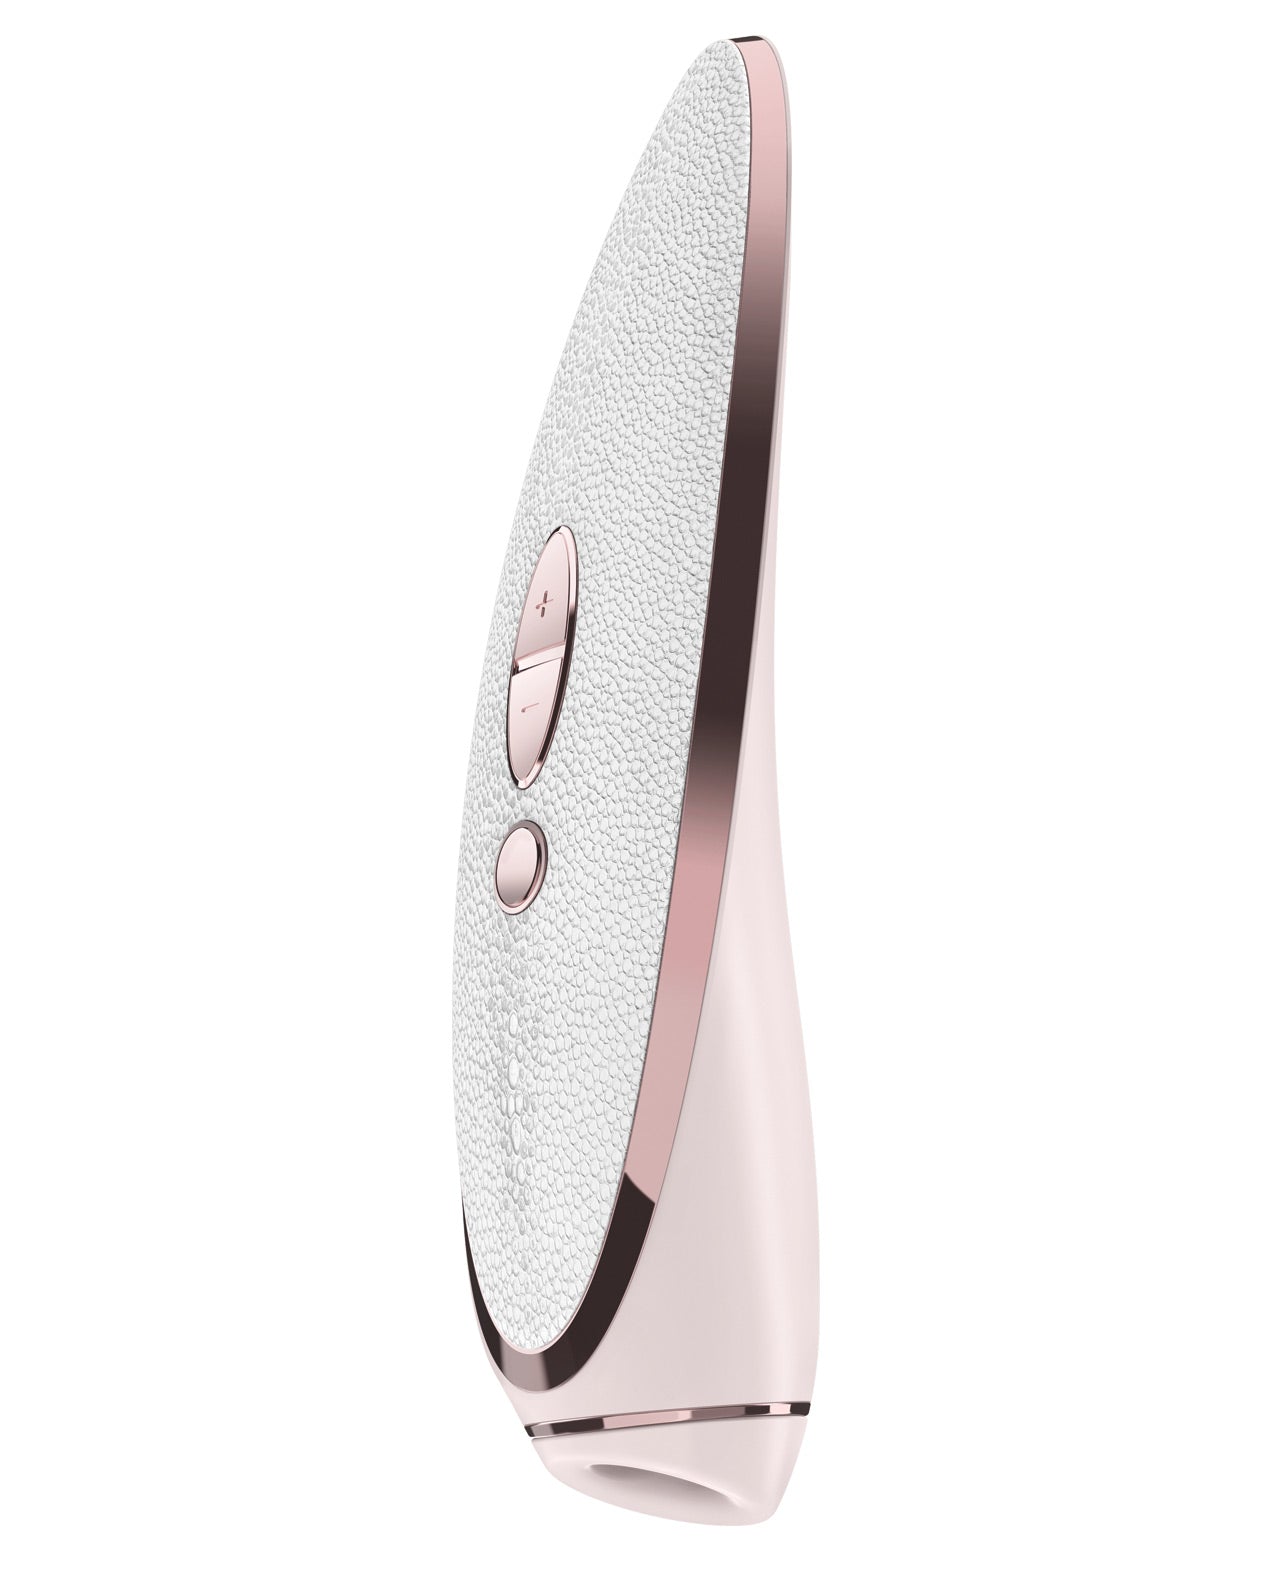 Satisfyer Luxury Pret-a-Porter Metal & Leather - White